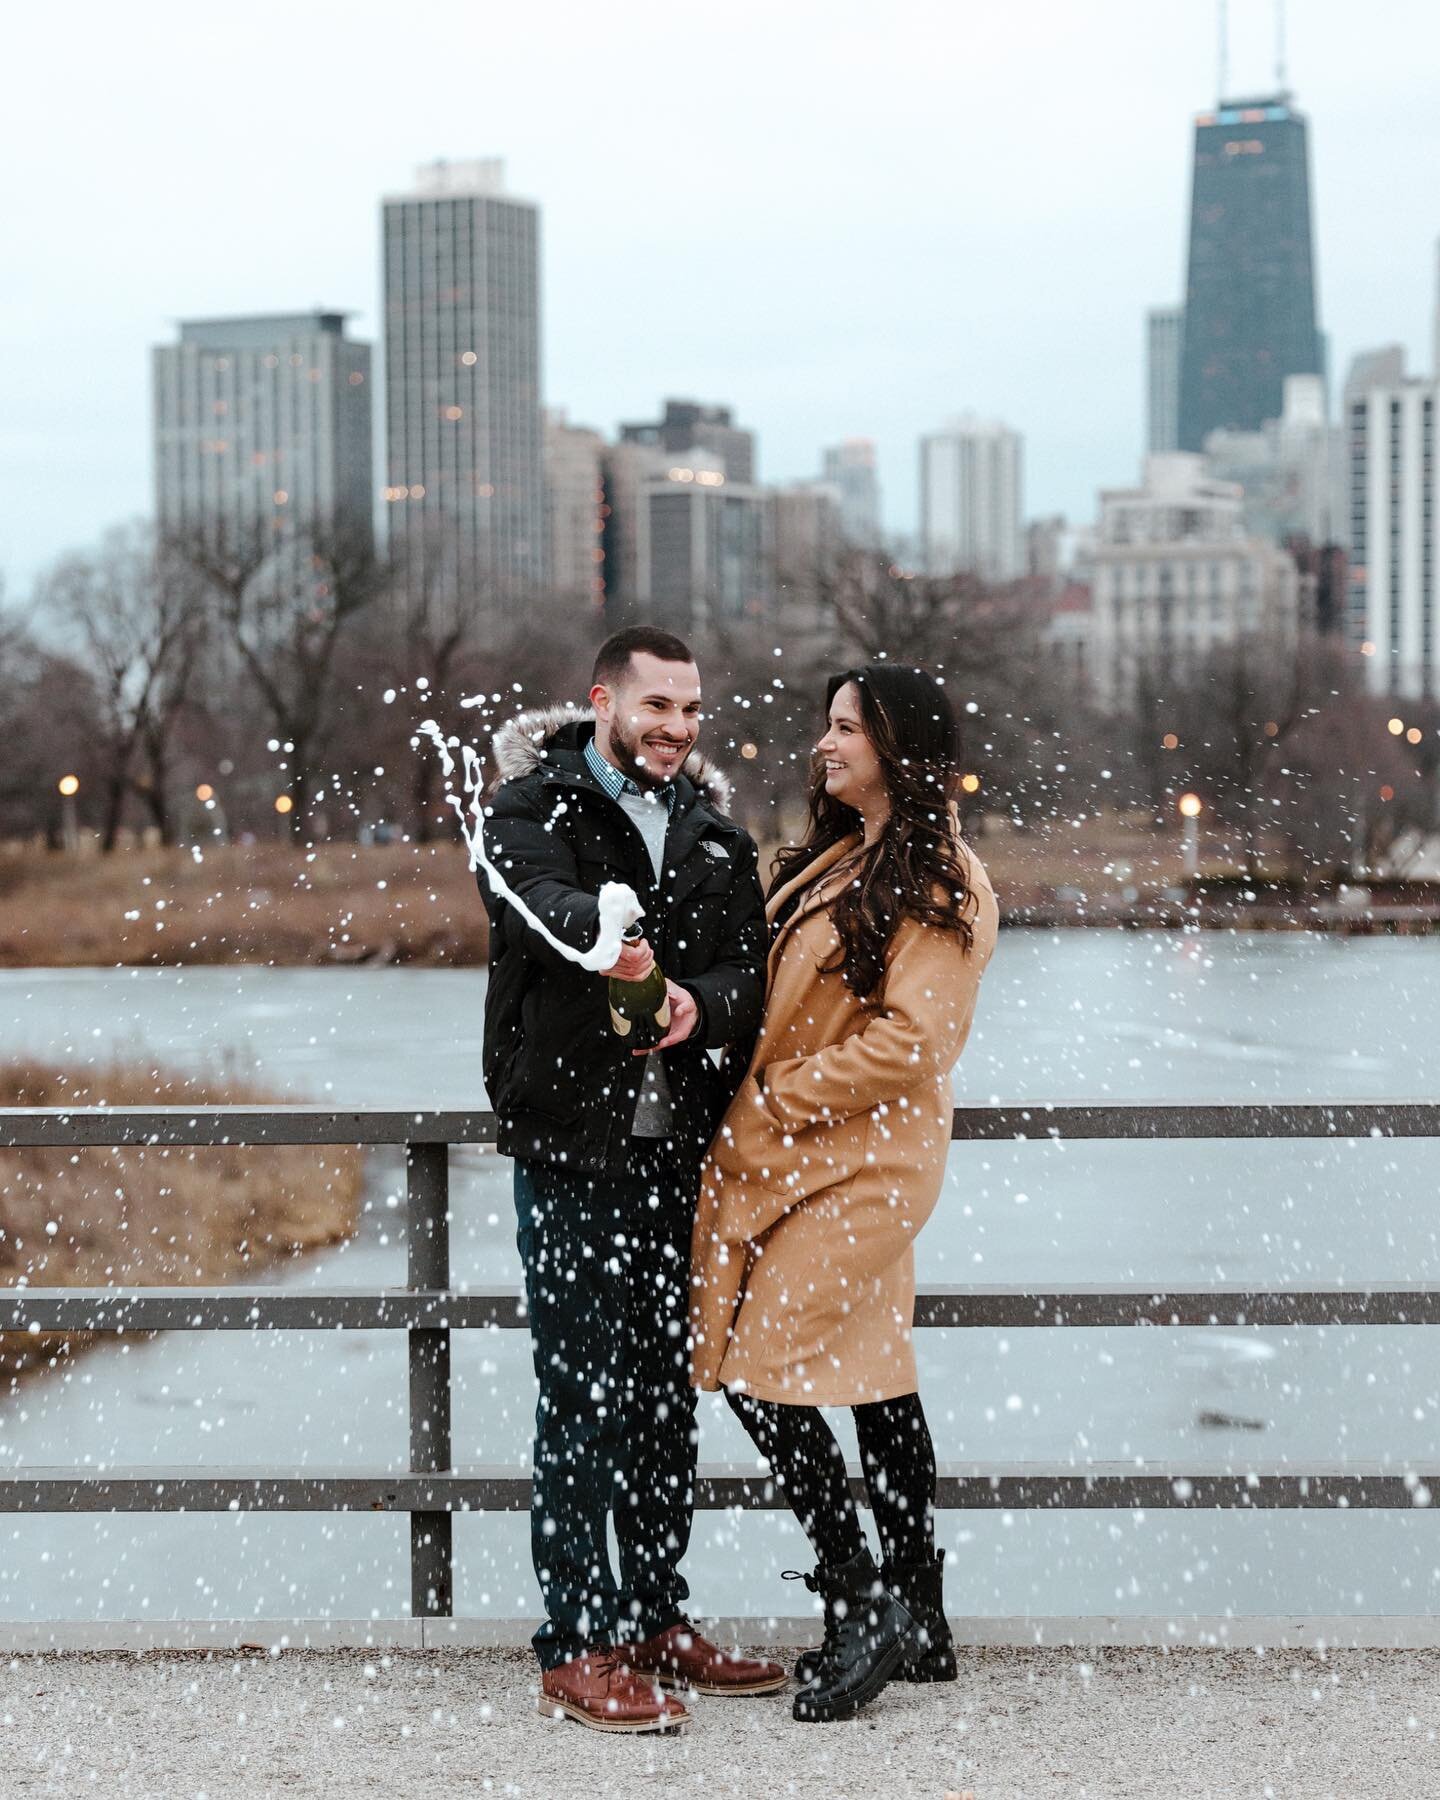 Another gorgeous proposal in the books + a beautiful start to 2023!! We are sooo excited for all the amazing couples that we get to serve this year, starting with Lucas + Yvette!!✨

Shot by our wonderfully talented photog, Amy!!!🫶🏼
&bull;
&bull;
&b